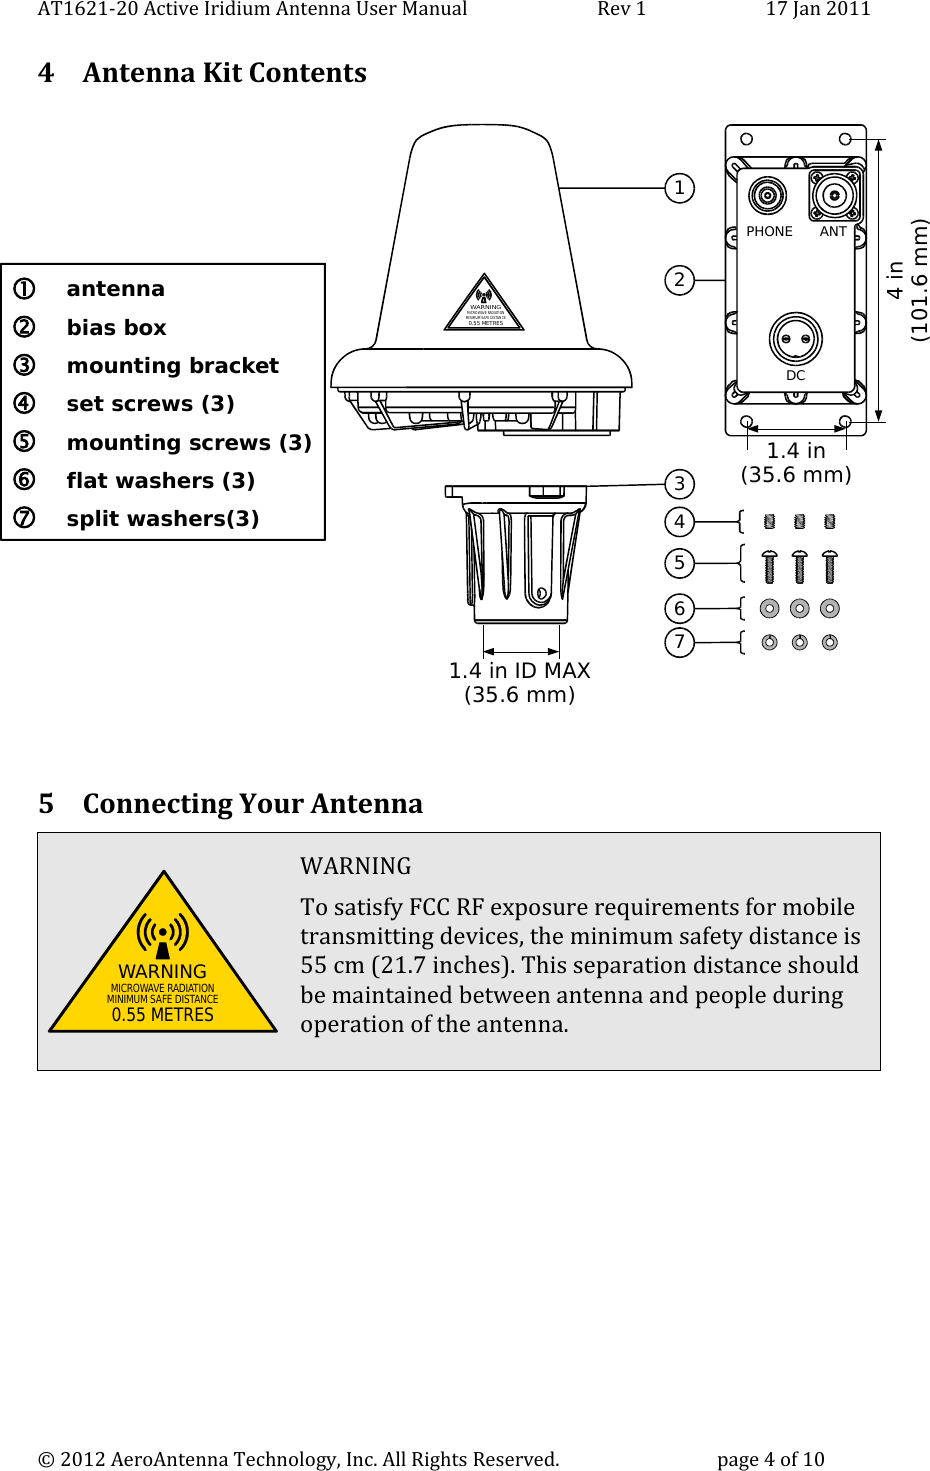 AT1621-20 Active Iridium Antenna User Manual                            Rev 1 17 Jan 20114 Antenna Kit ContentsDCANTPHONEWARNINGMICRO WAVE RADIATIONMINIMUM SAFE DIS TANCE0.55 METRES13245671.4 in(35.6 mm)4 in(101.6 mm)1.4 in ID MAX(35.6 mm) antenna bias box mounting bracket set screws (3) mounting screws (3) flat washers (3) split washers(3) 5 Connecting Your AntennaWARNING To satisfy FCC RF exposure requirements for mobiletransmitting devices, the minimum safety distance is55 cm (21.7 inches). This separation distance shouldbe maintained between antenna and people duringoperation of the antenna. © 2012 AeroAntenna Technology, Inc. All Rights Reserved. page 4 of 10WARNINGMICROWAVE RADIATIONMINIMUM SAFE DISTANCE0.55 METRES